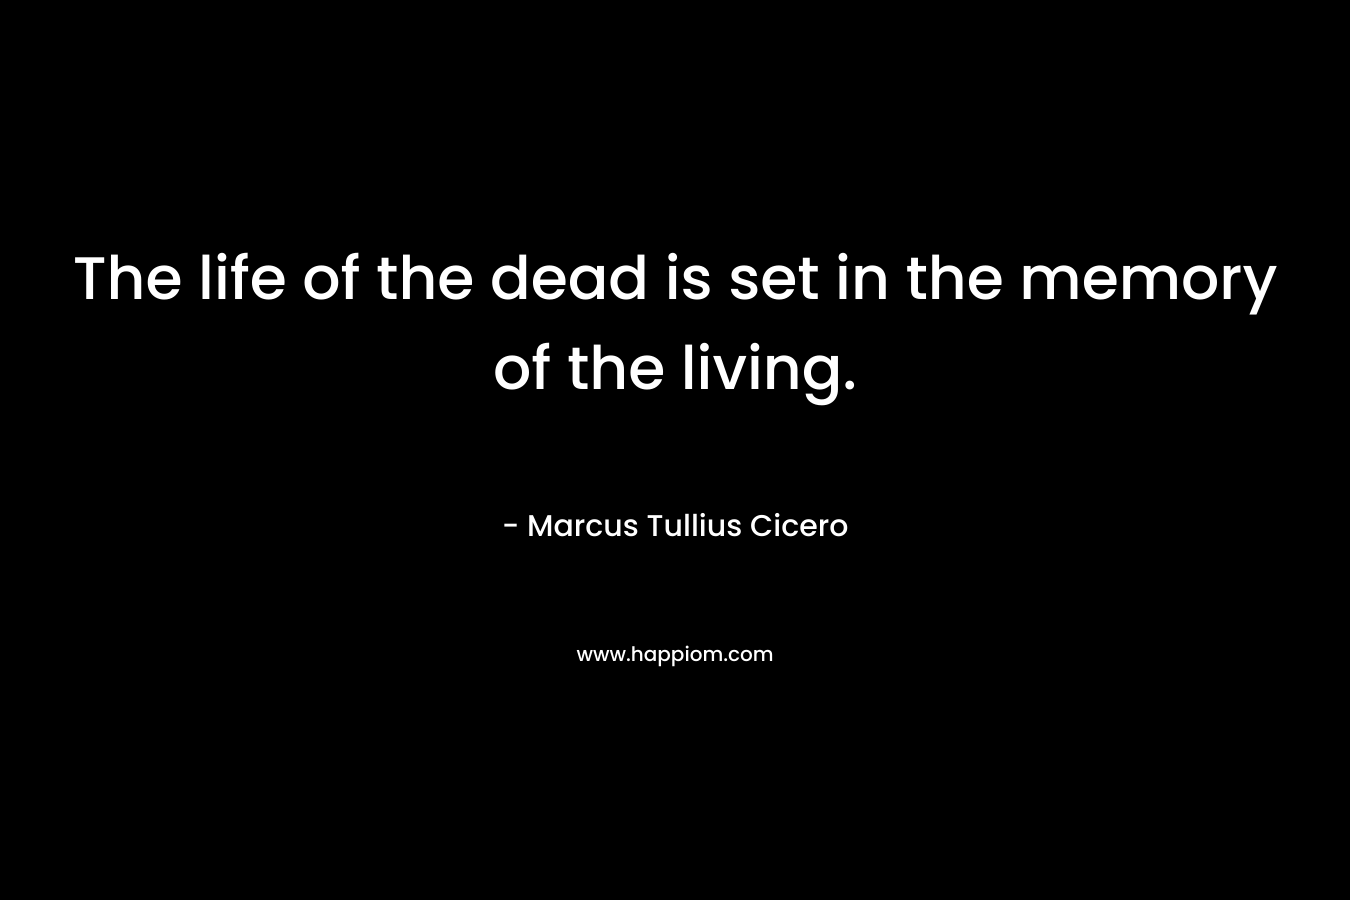 The life of the dead is set in the memory of the living. – Marcus Tullius Cicero